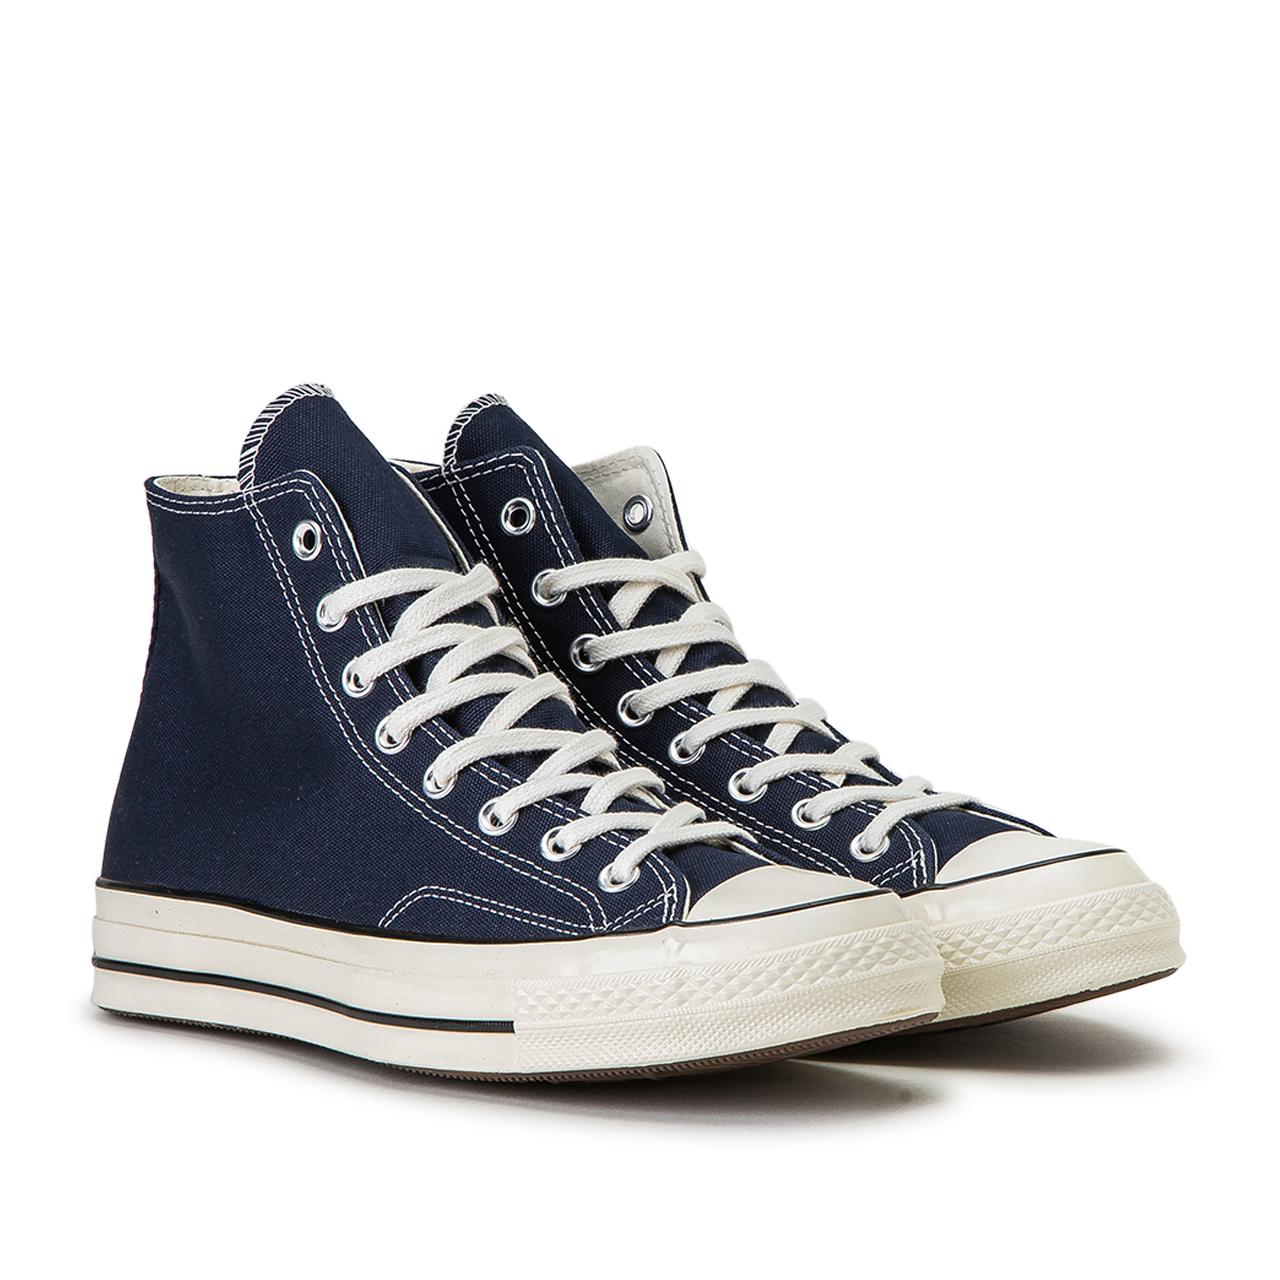 Converse Canvas Chuck Taylor 70 Hi in Navy (Blue) for Men - Lyst